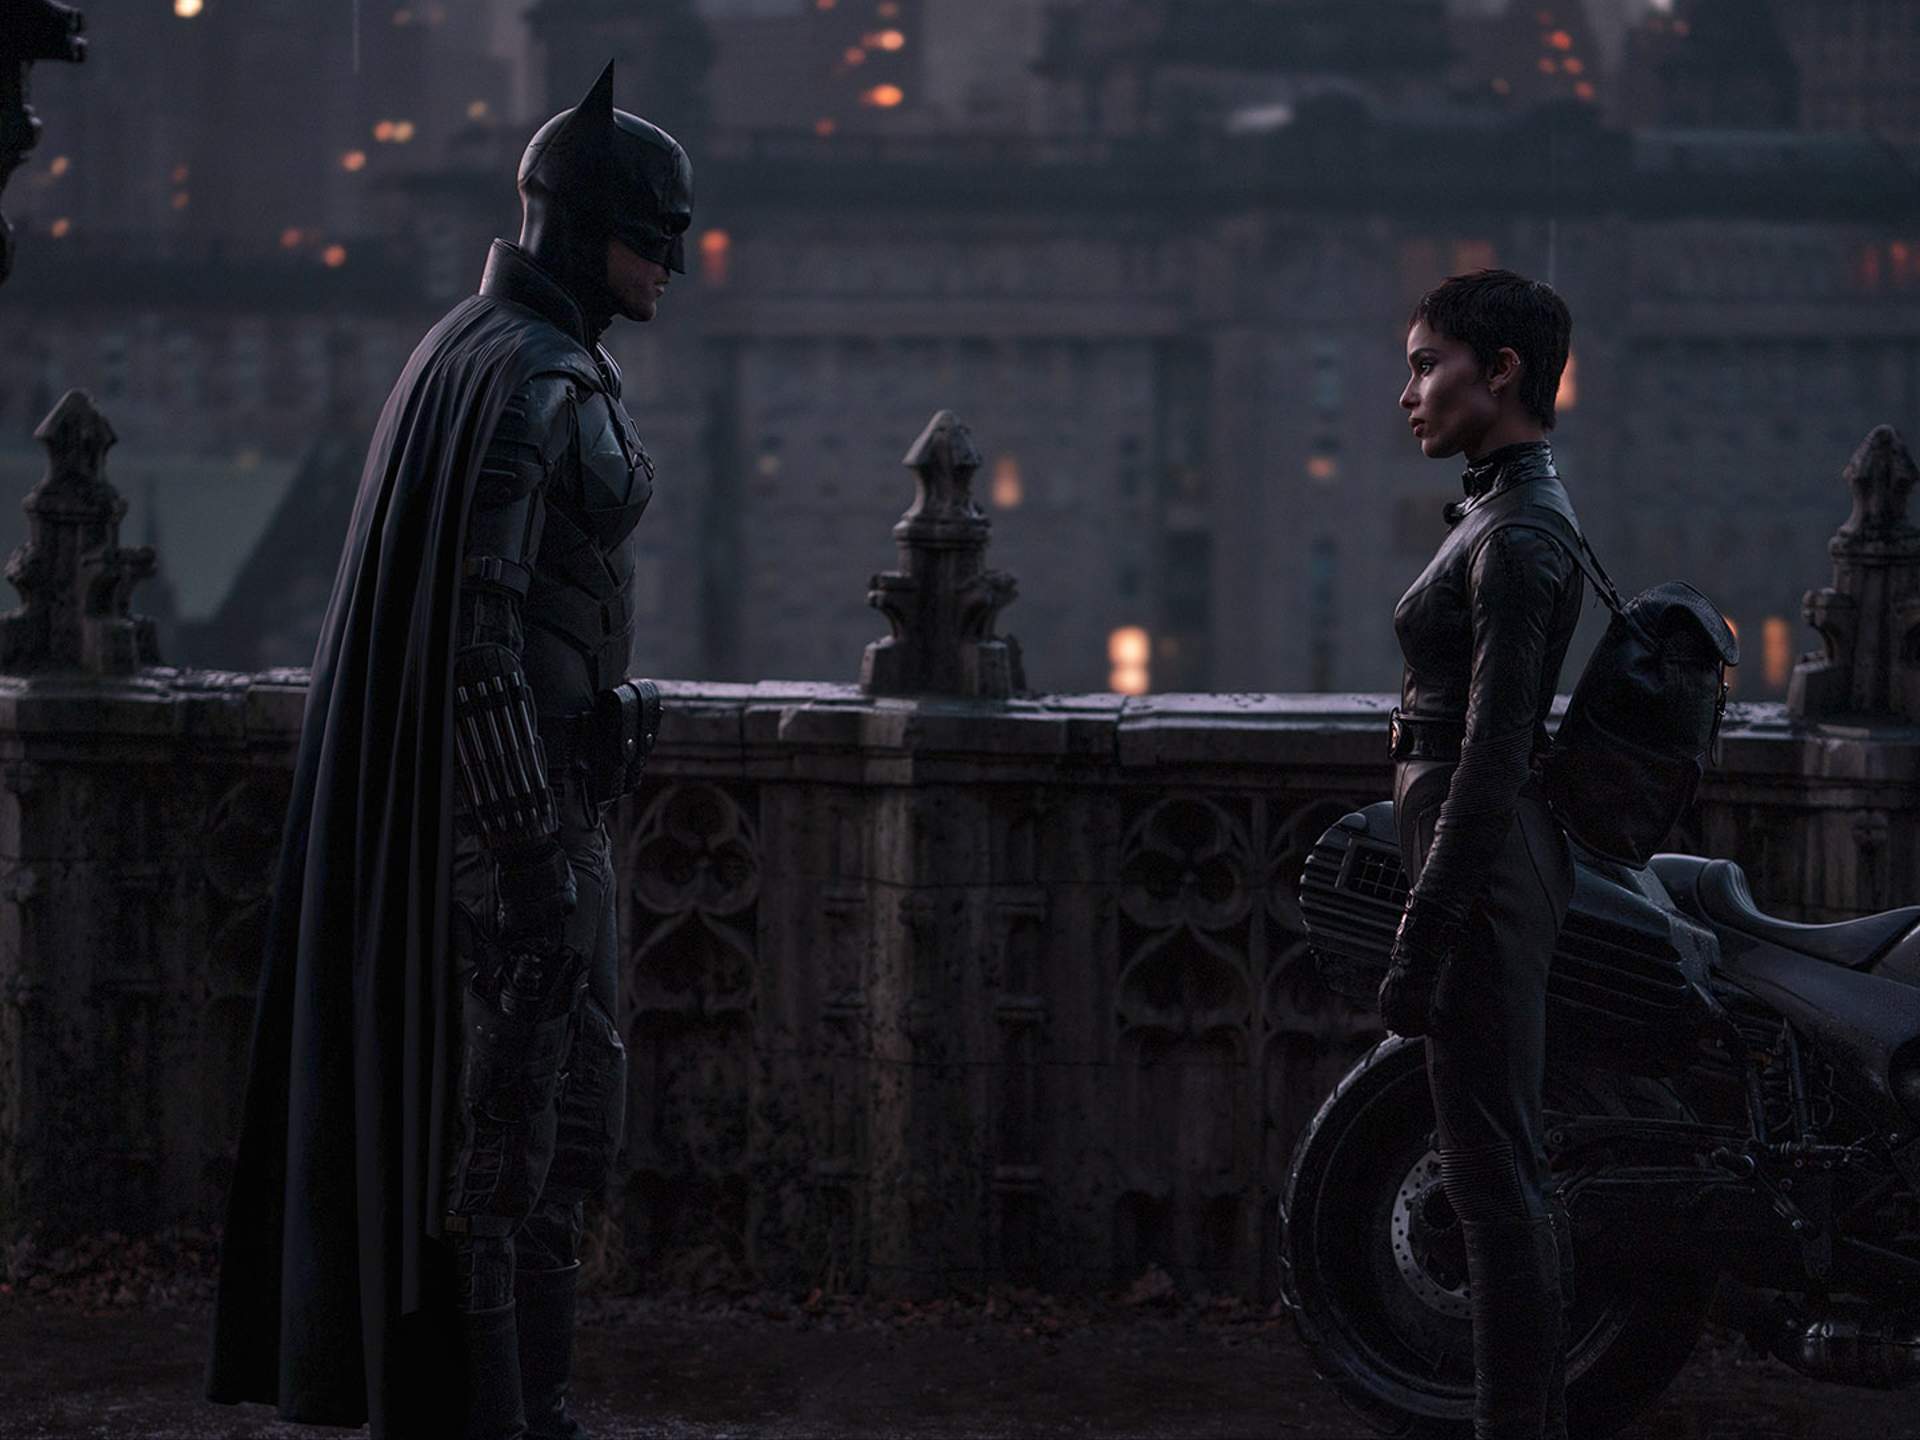 The Batman Is the Latest Blockbuster Thats Been Fast-Tracked to Digital While Still in Cinemas